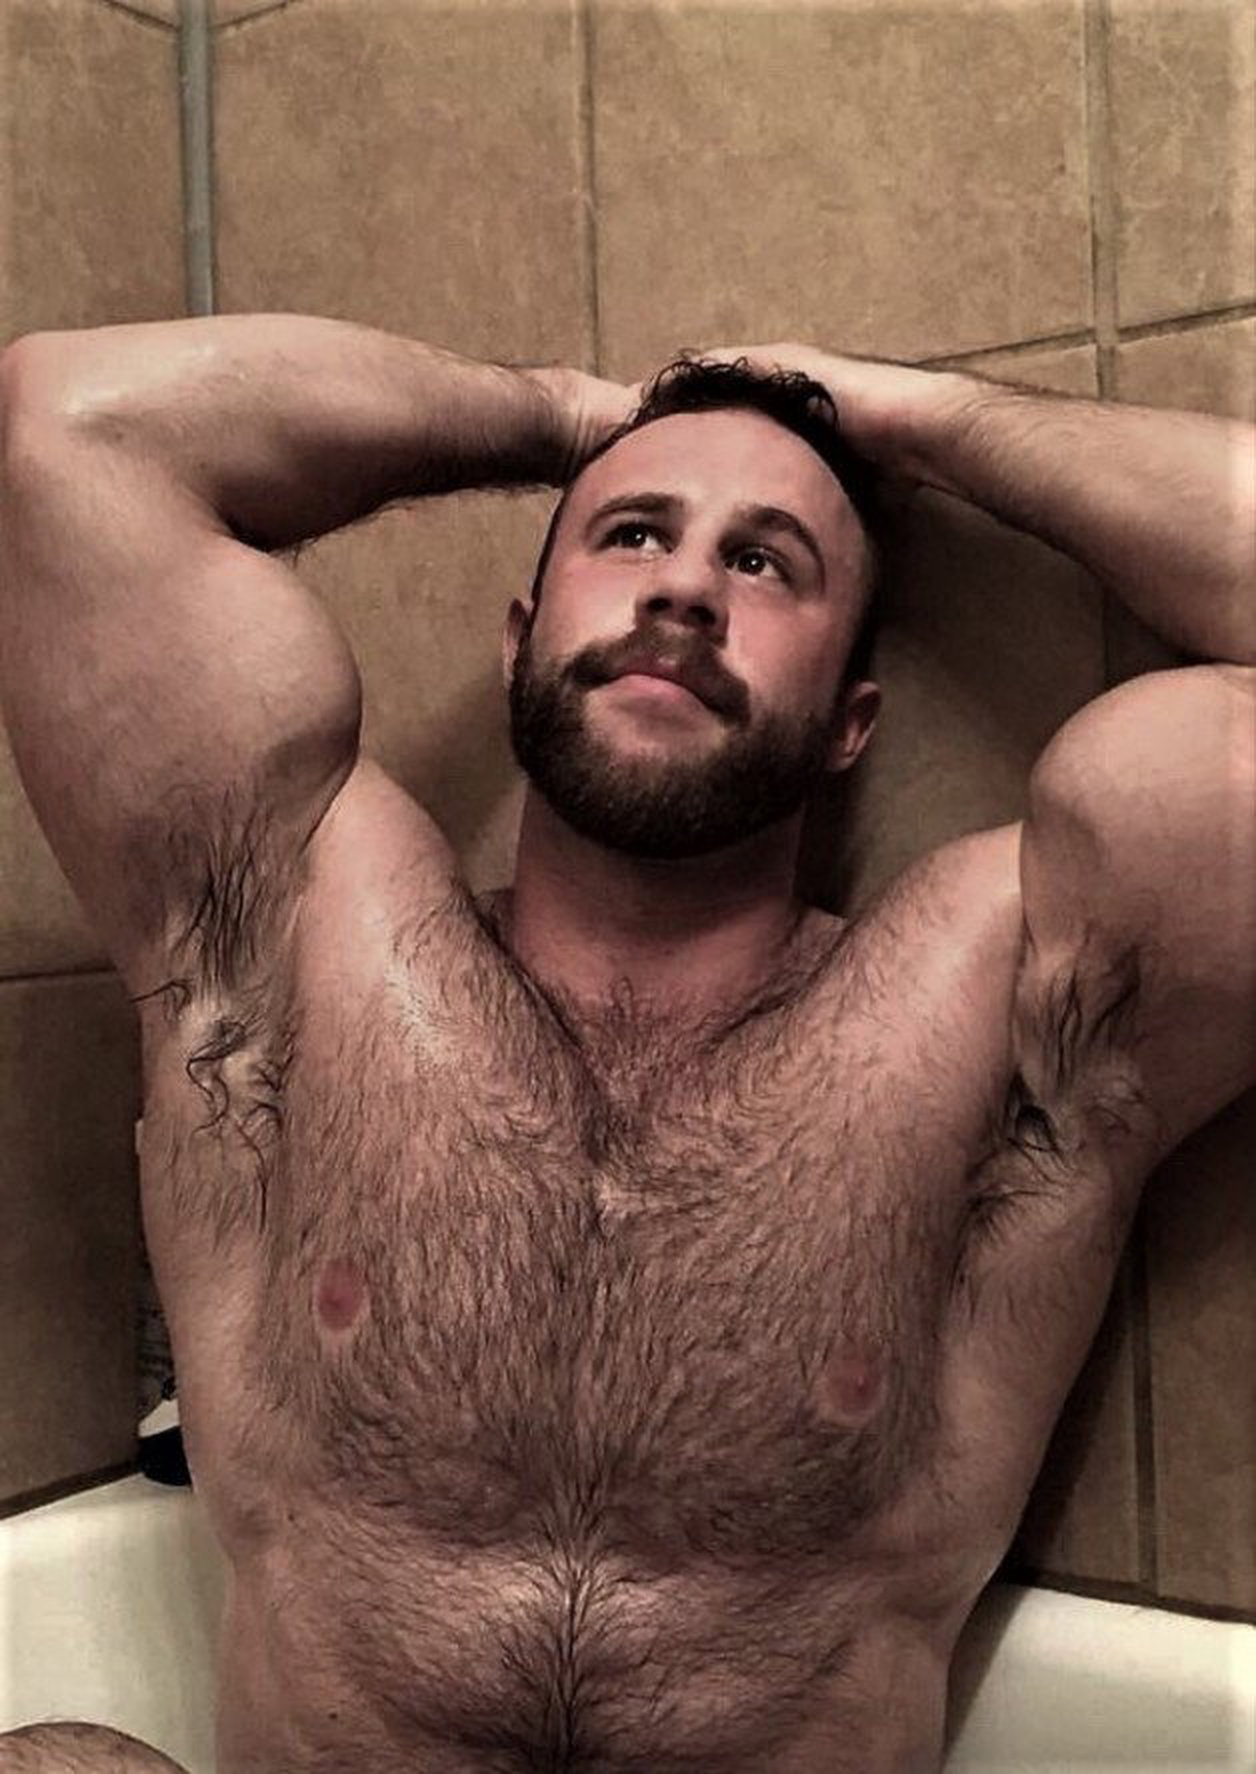 Photo by Smitty with the username @Resol702,  December 4, 2021 at 6:05 PM. The post is about the topic Gay Hairy Men